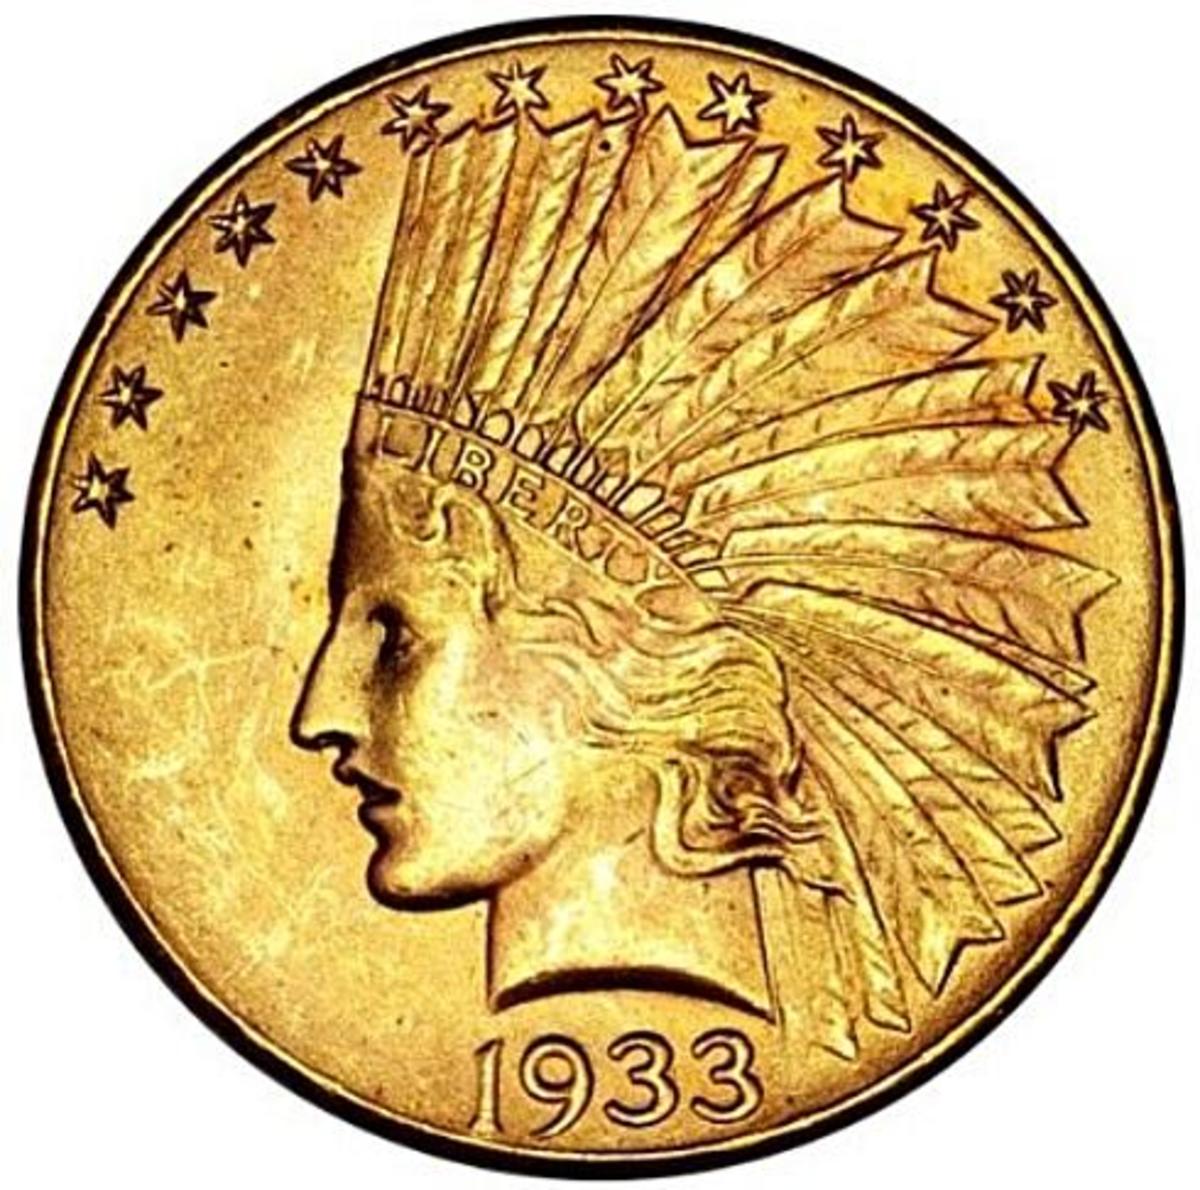 Obverse of the 1933 Indian Head gold $10. (All images courtesy American Numismatic Association.)